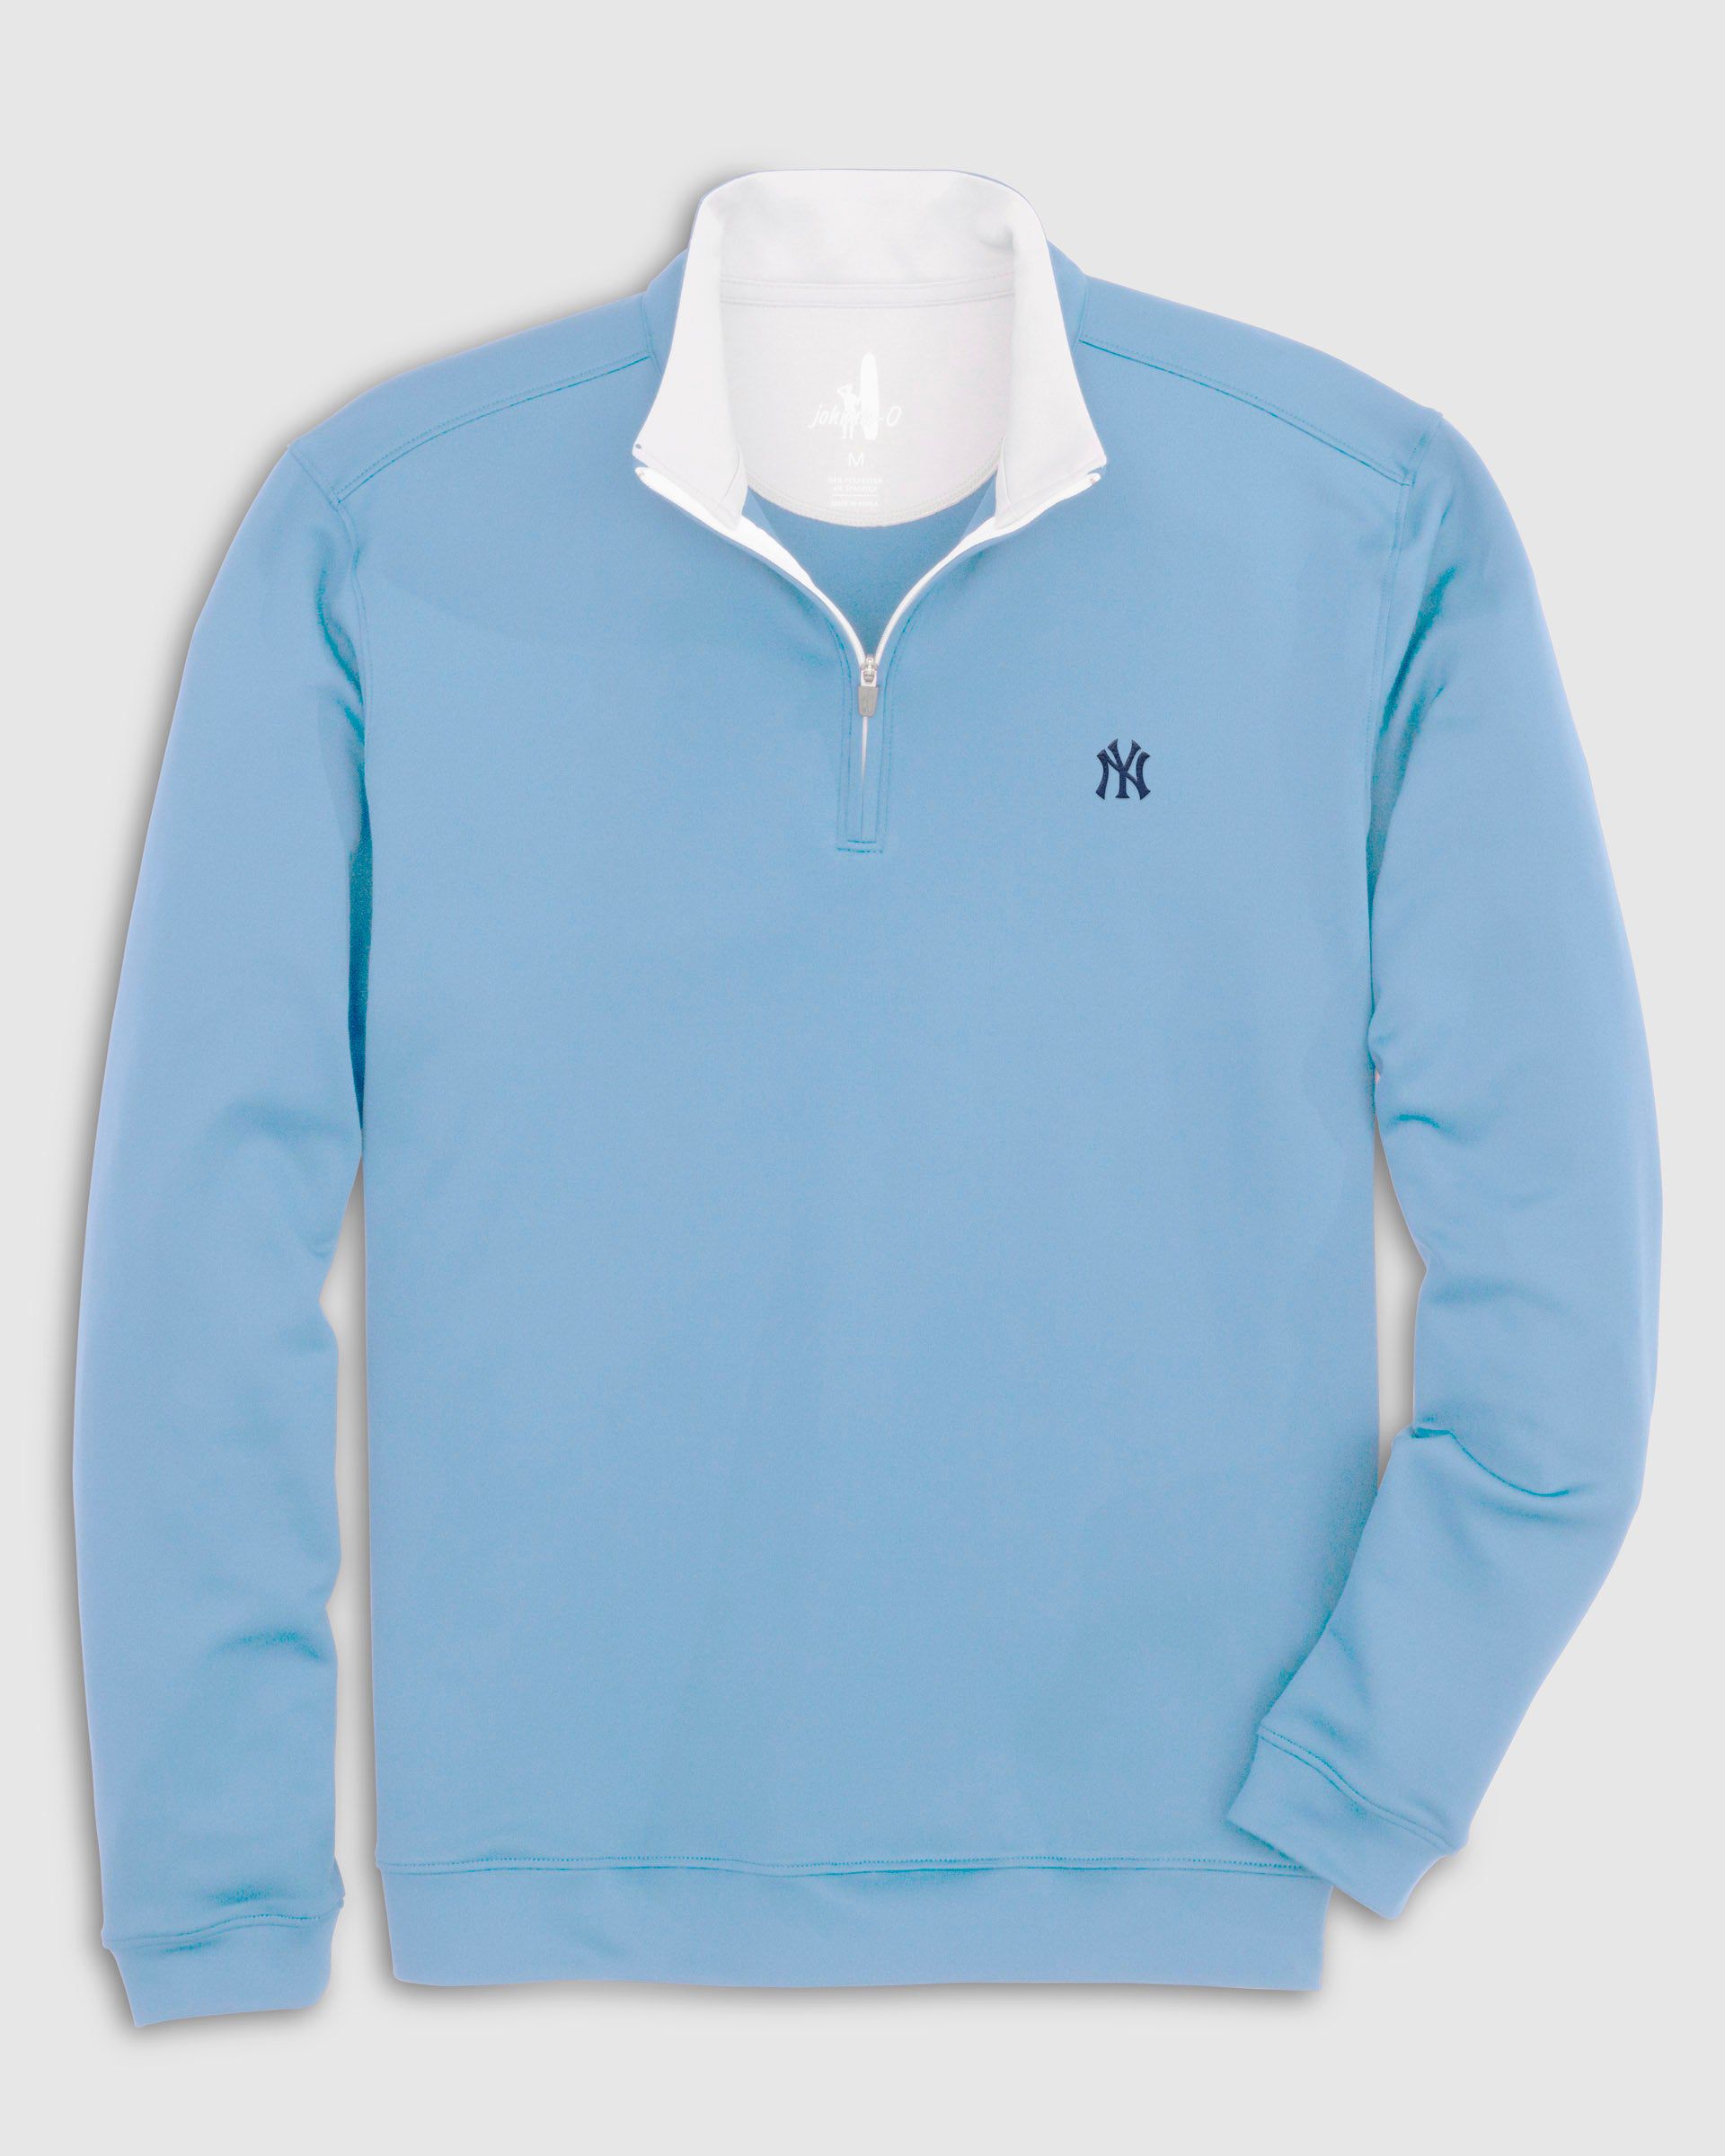 johnnie-O Yankees Diaz 1/4 Zip Pullover in Quarry - Size: XL